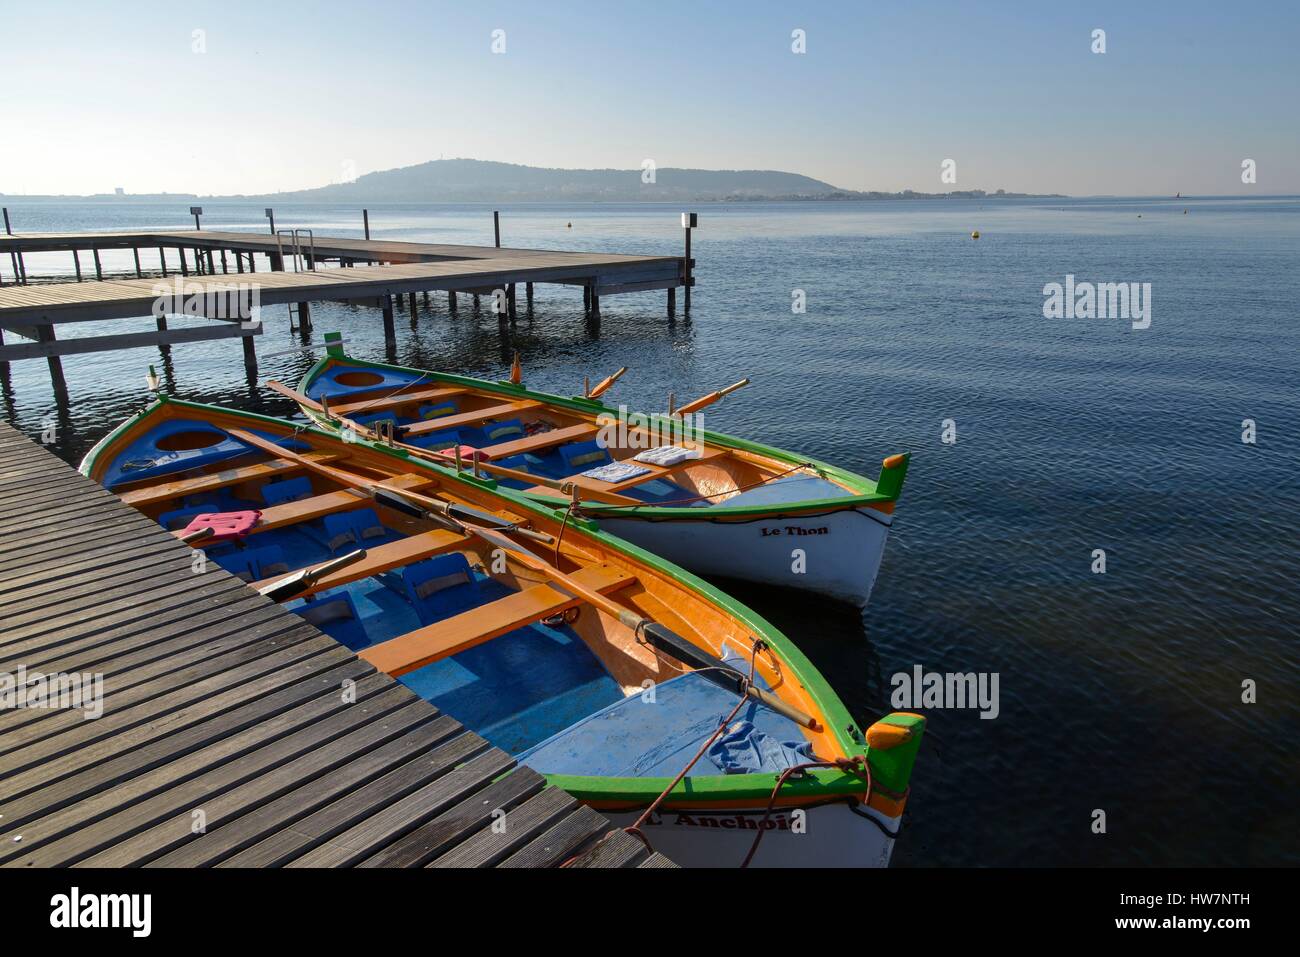 France, Herault, Thau pond, Balaruc les Bains, fishermen's traditional boats moored alongside a quay with the Saint Clair Mount in the background Stock Photo